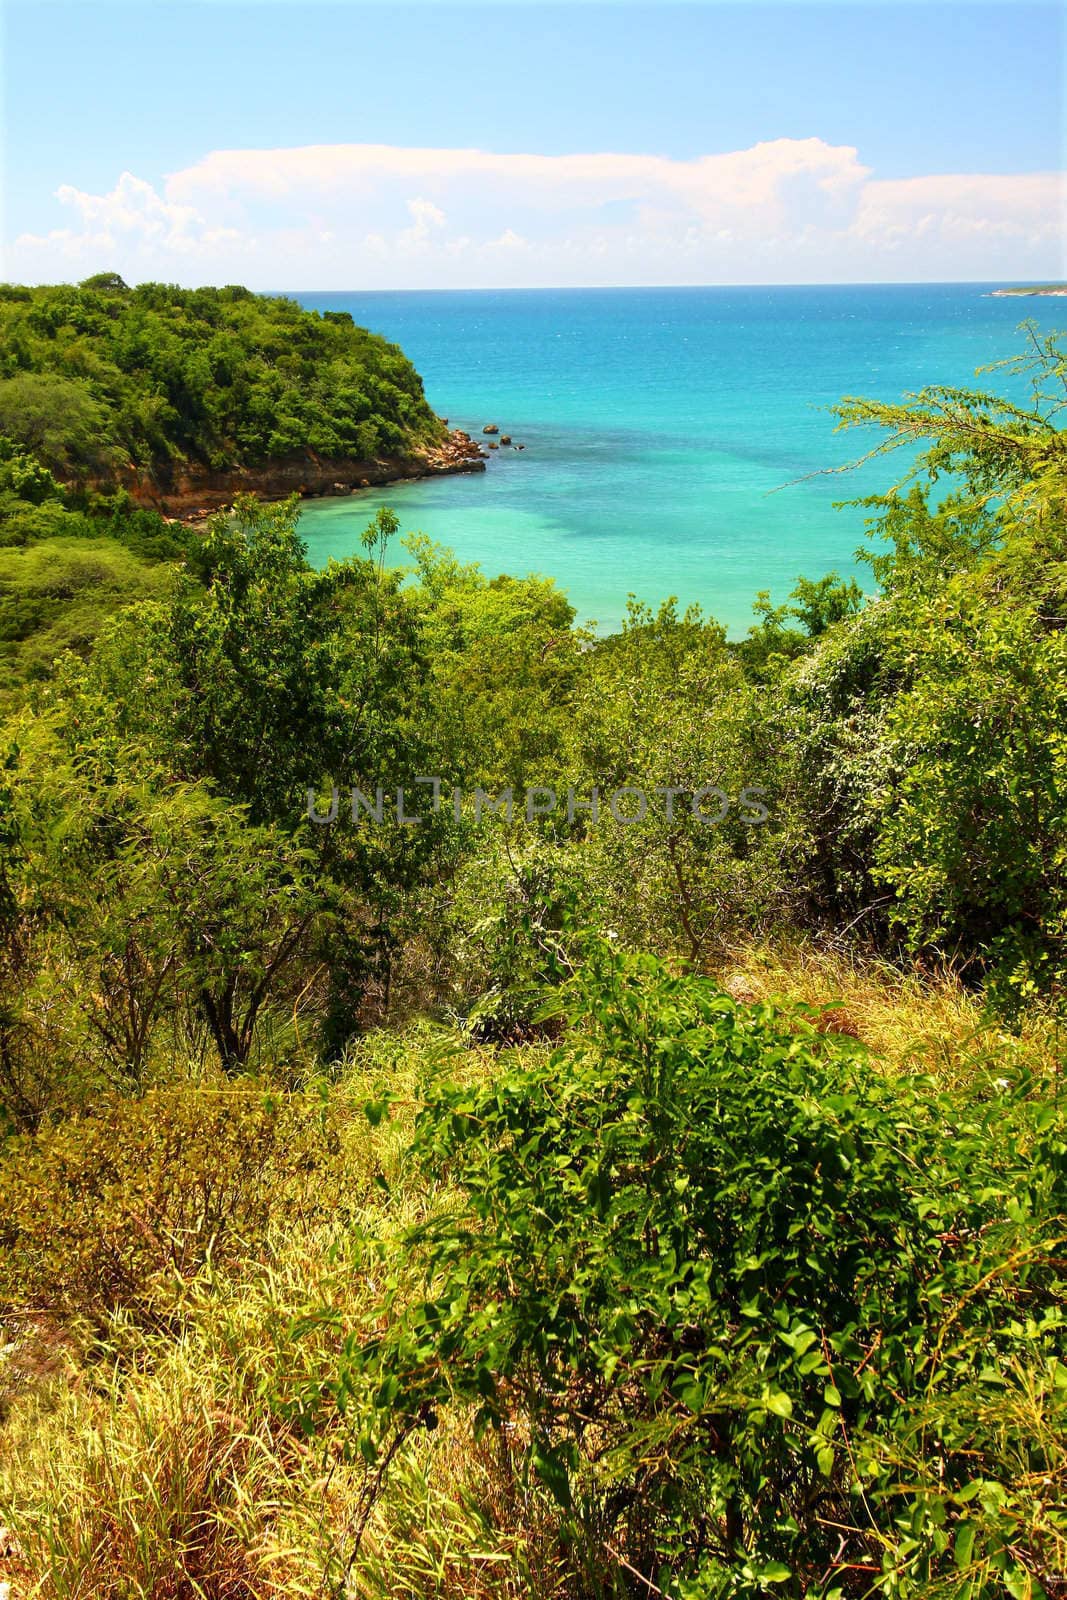 The Caribbean coastline at Guanica Dry Forest Reserve - Puerto Rico.